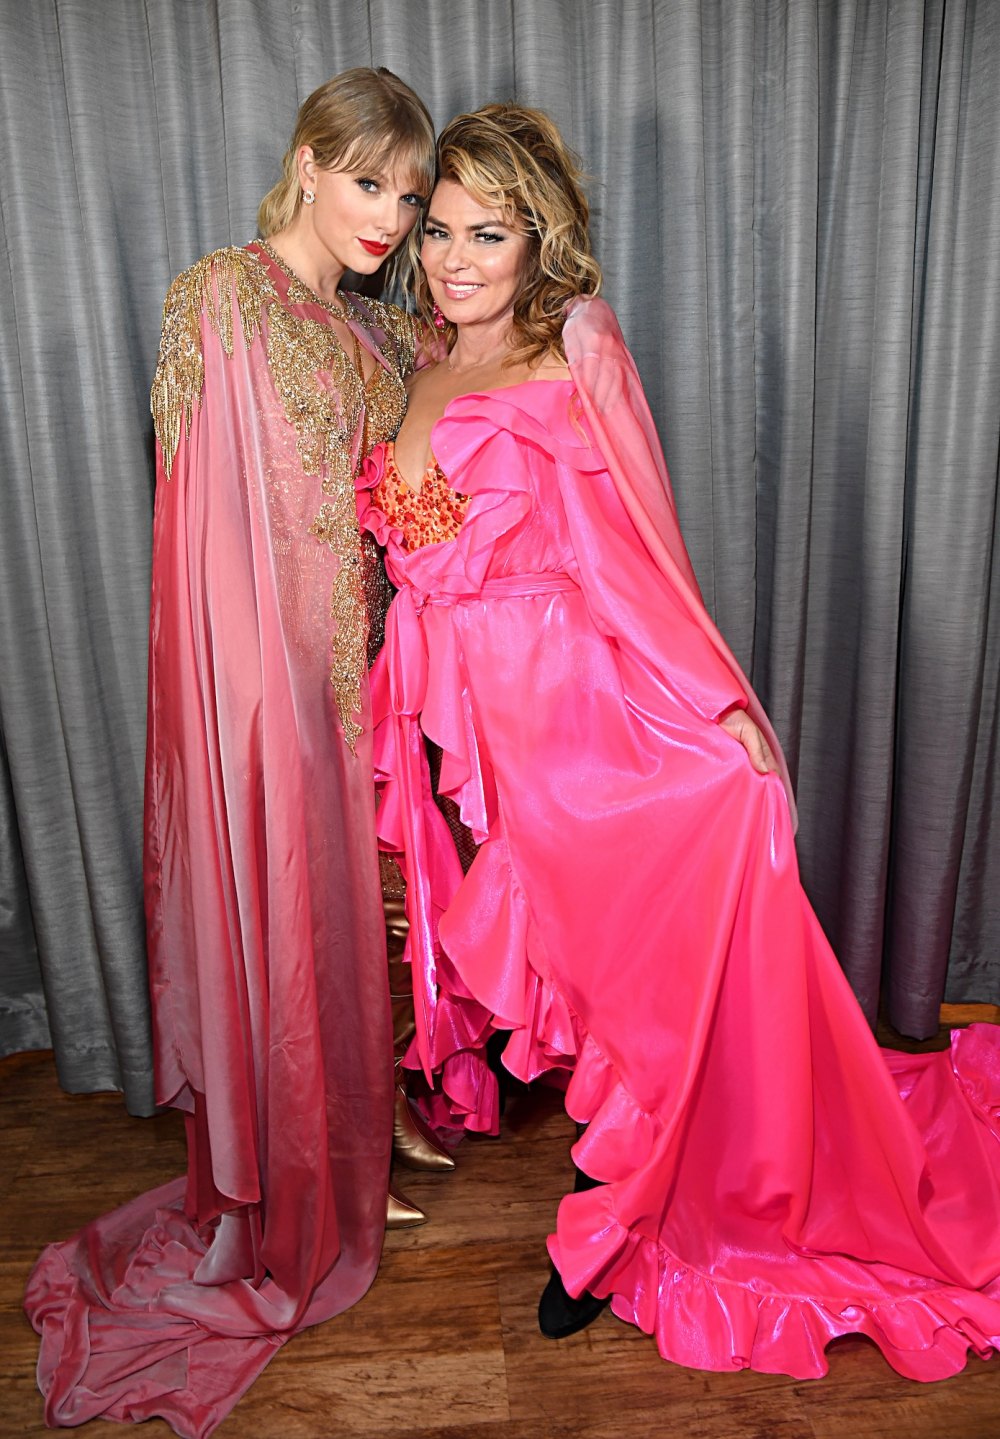 GettyImages-1189869058-Taylor Swift and Shania Twain at American Music Awards